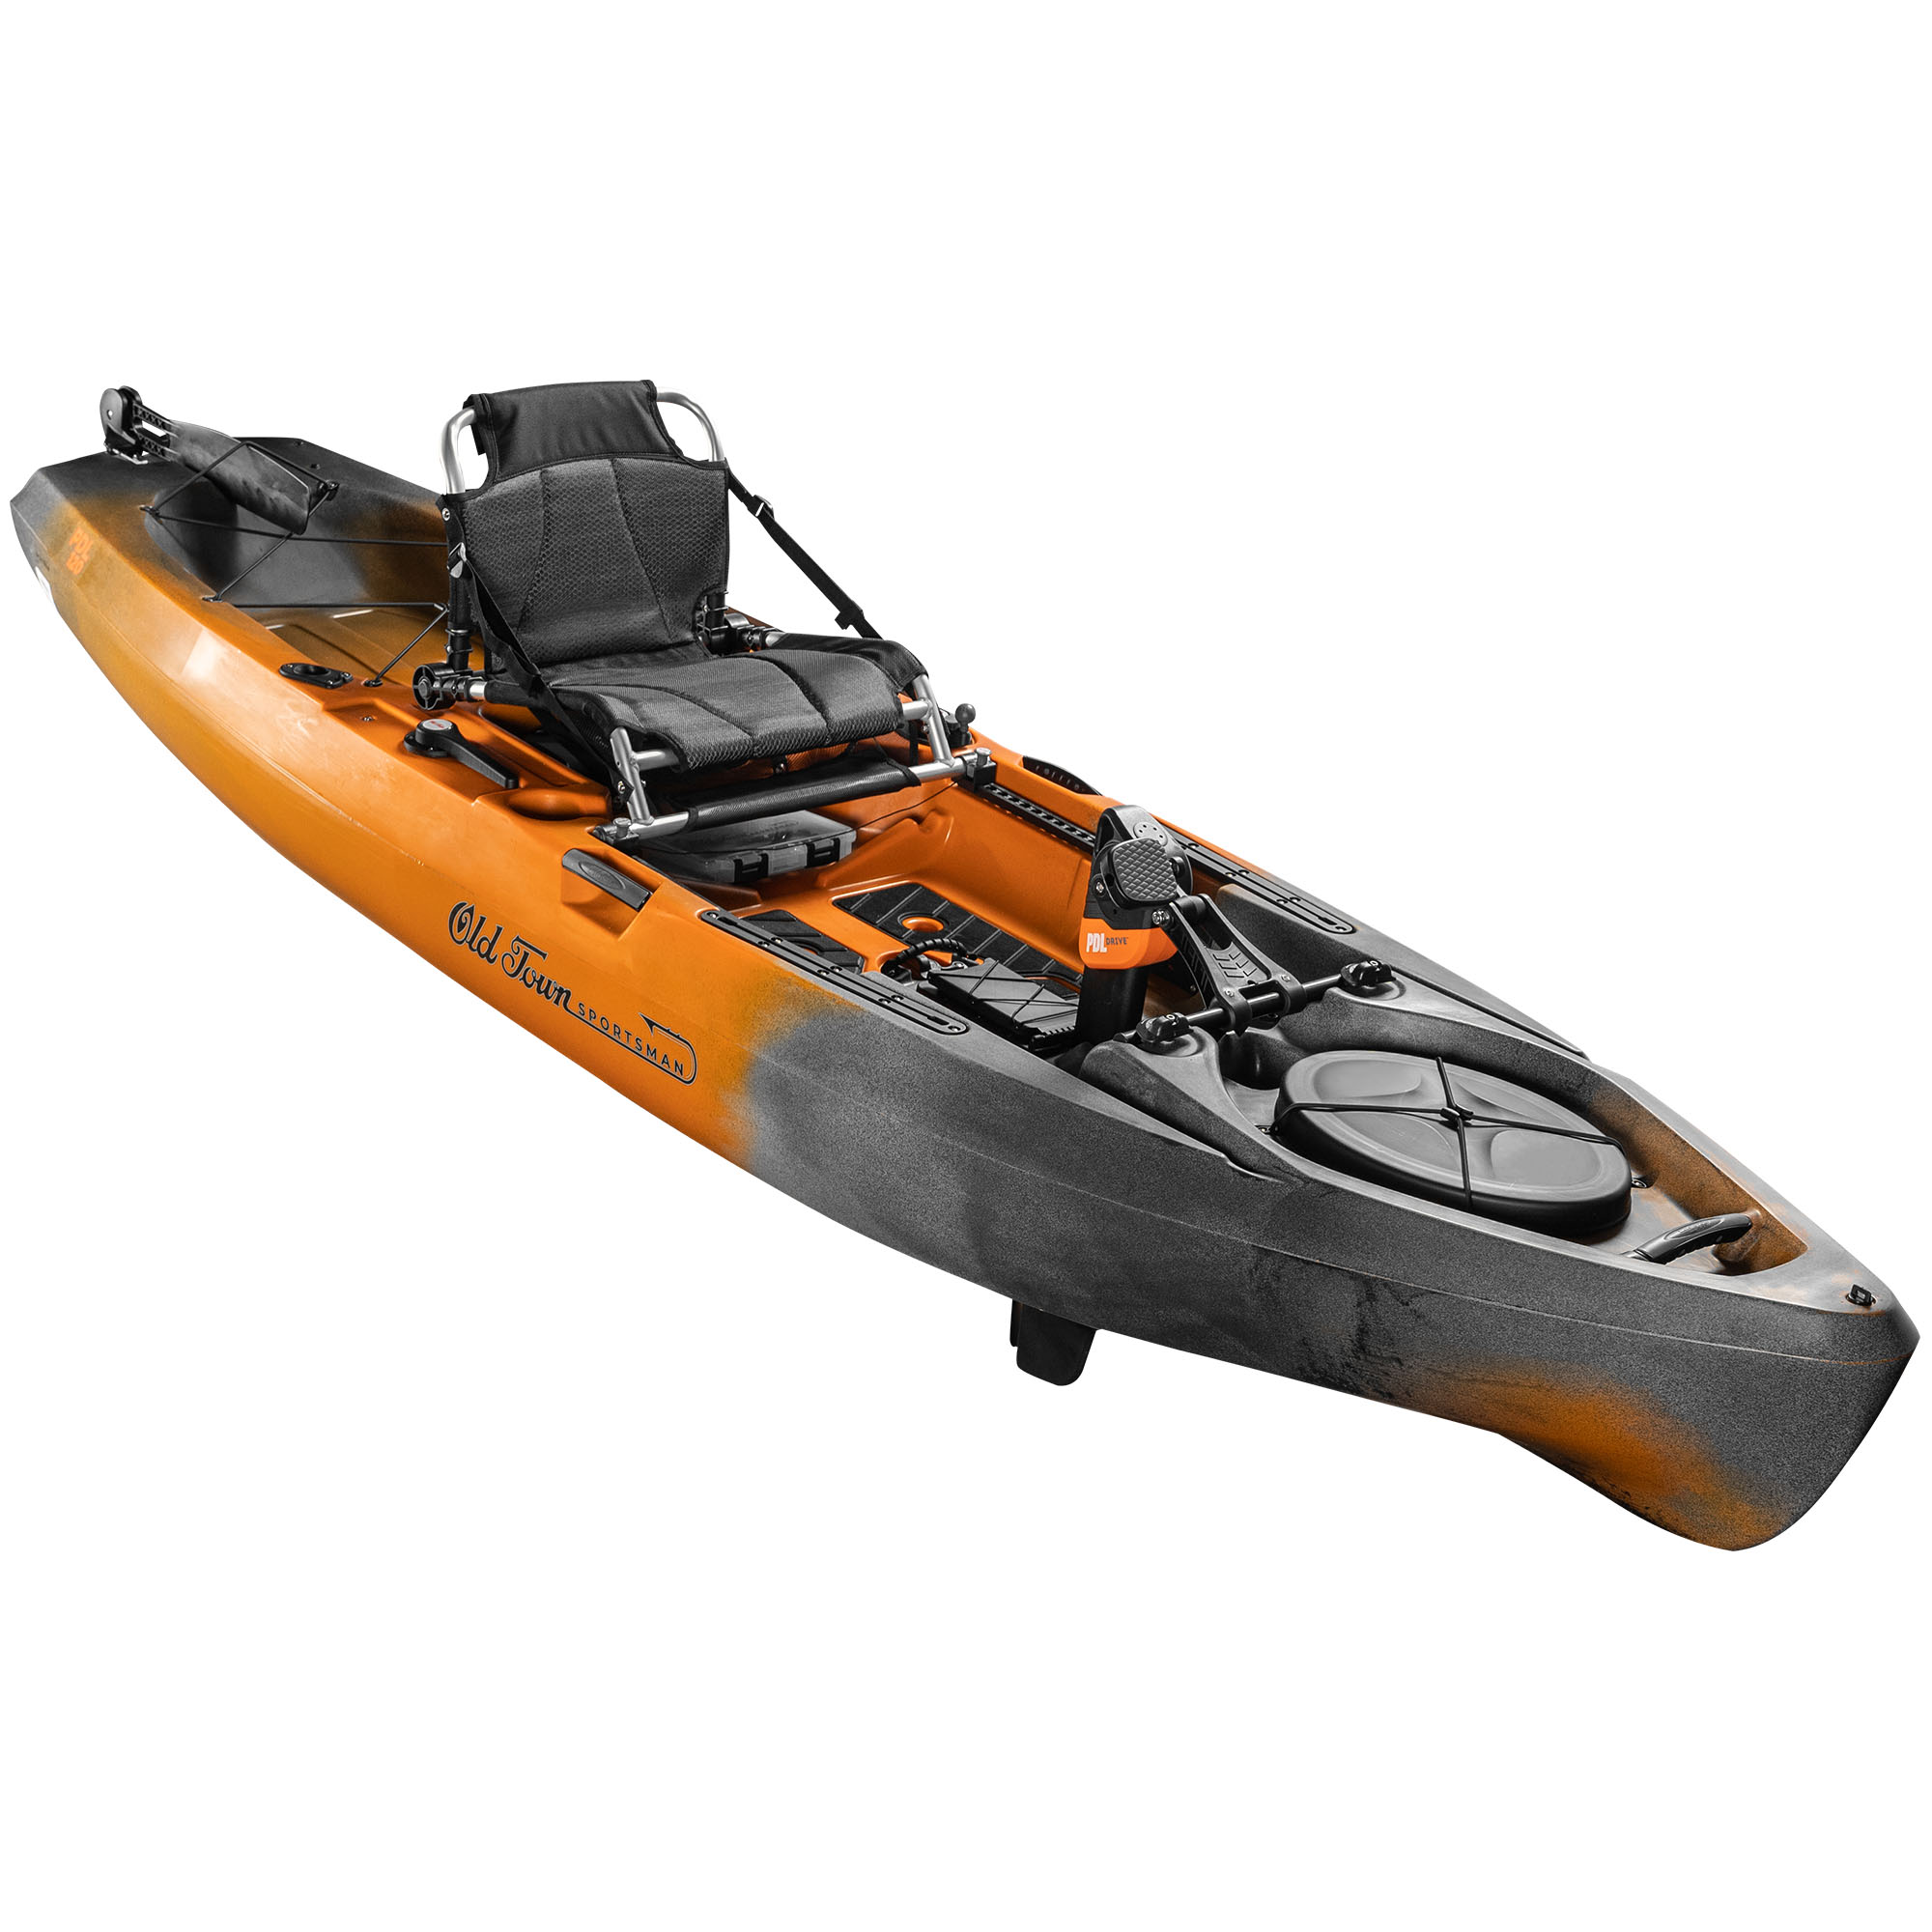 Kayak image provided by New York State Park Police